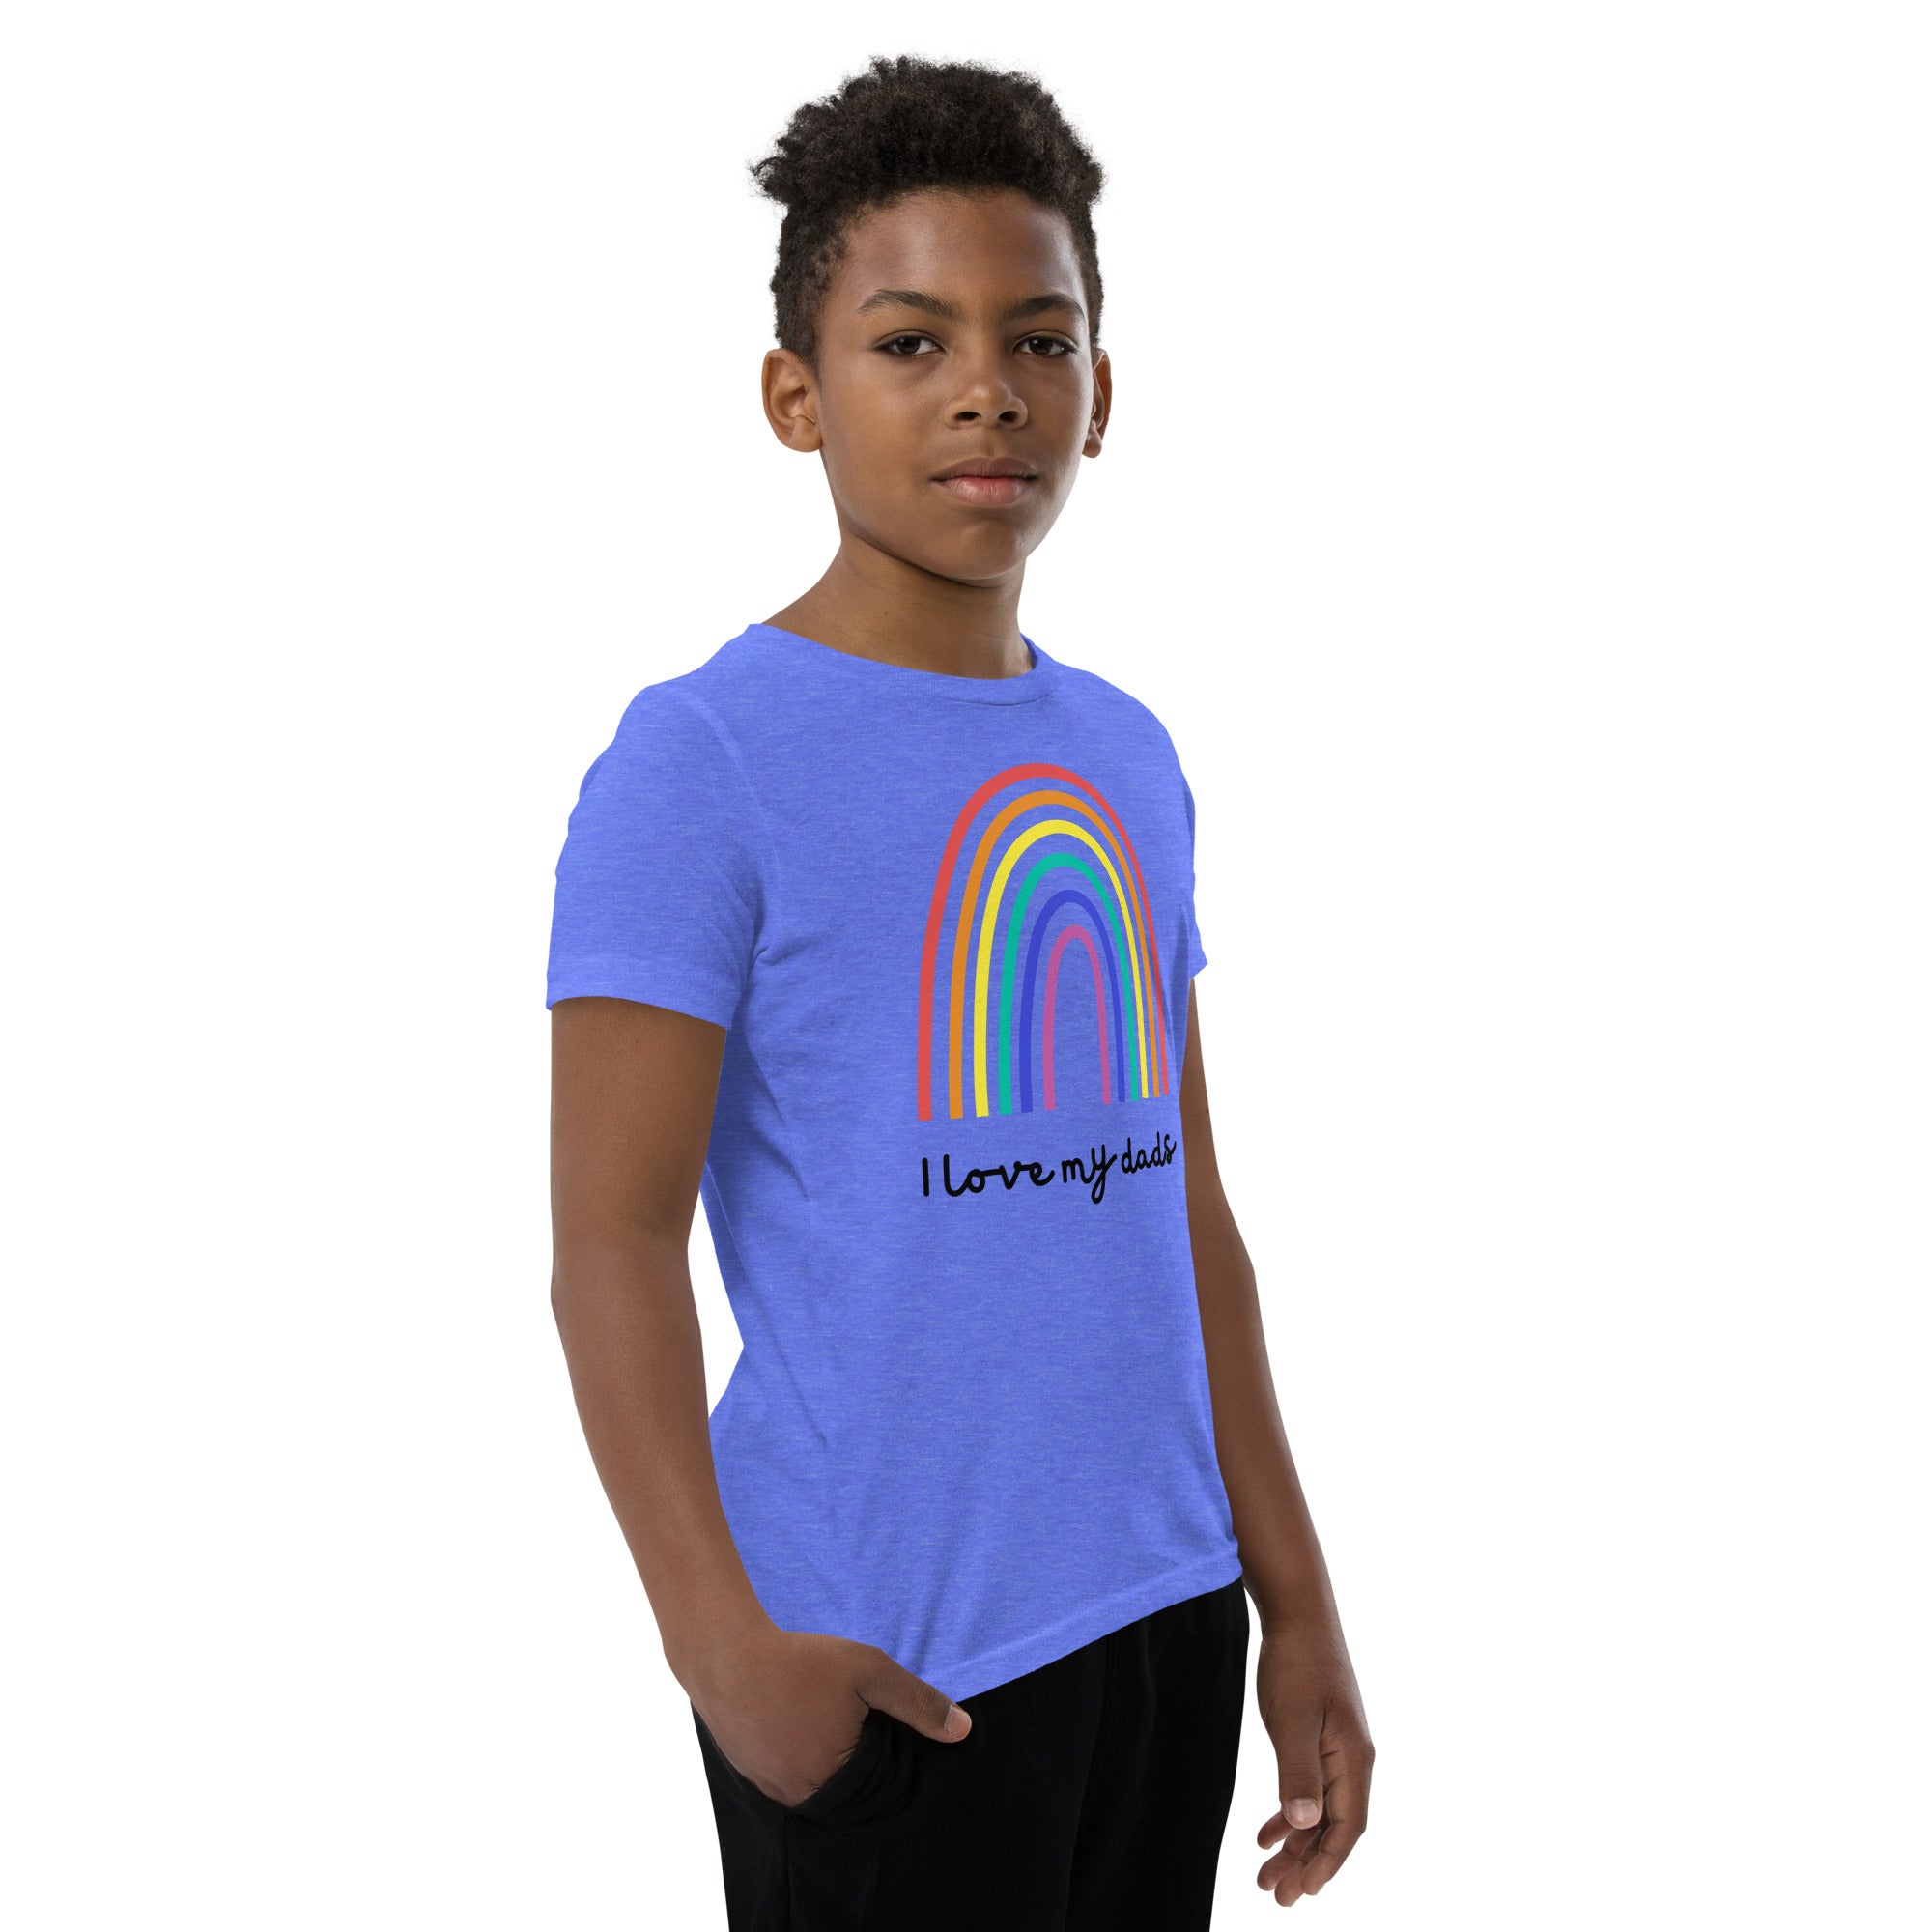 I Love My Dads - Youth Short Sleeve T-Shirt